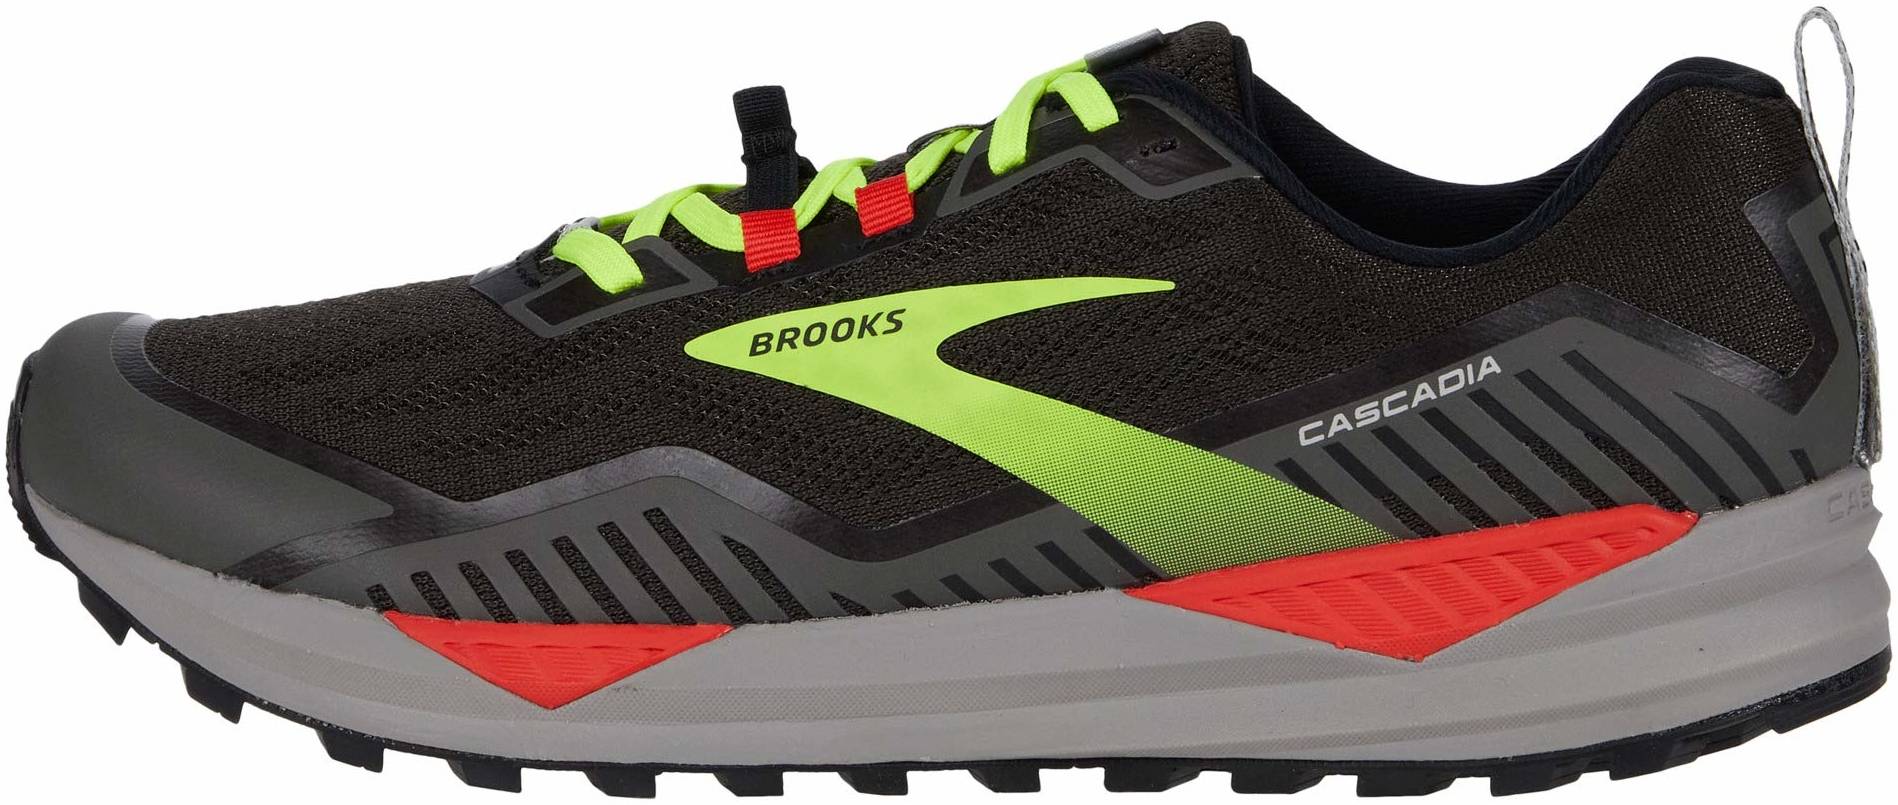 Brooks Cascadia 15 Review 2022, Facts, Deals ($95) | RunRepeat